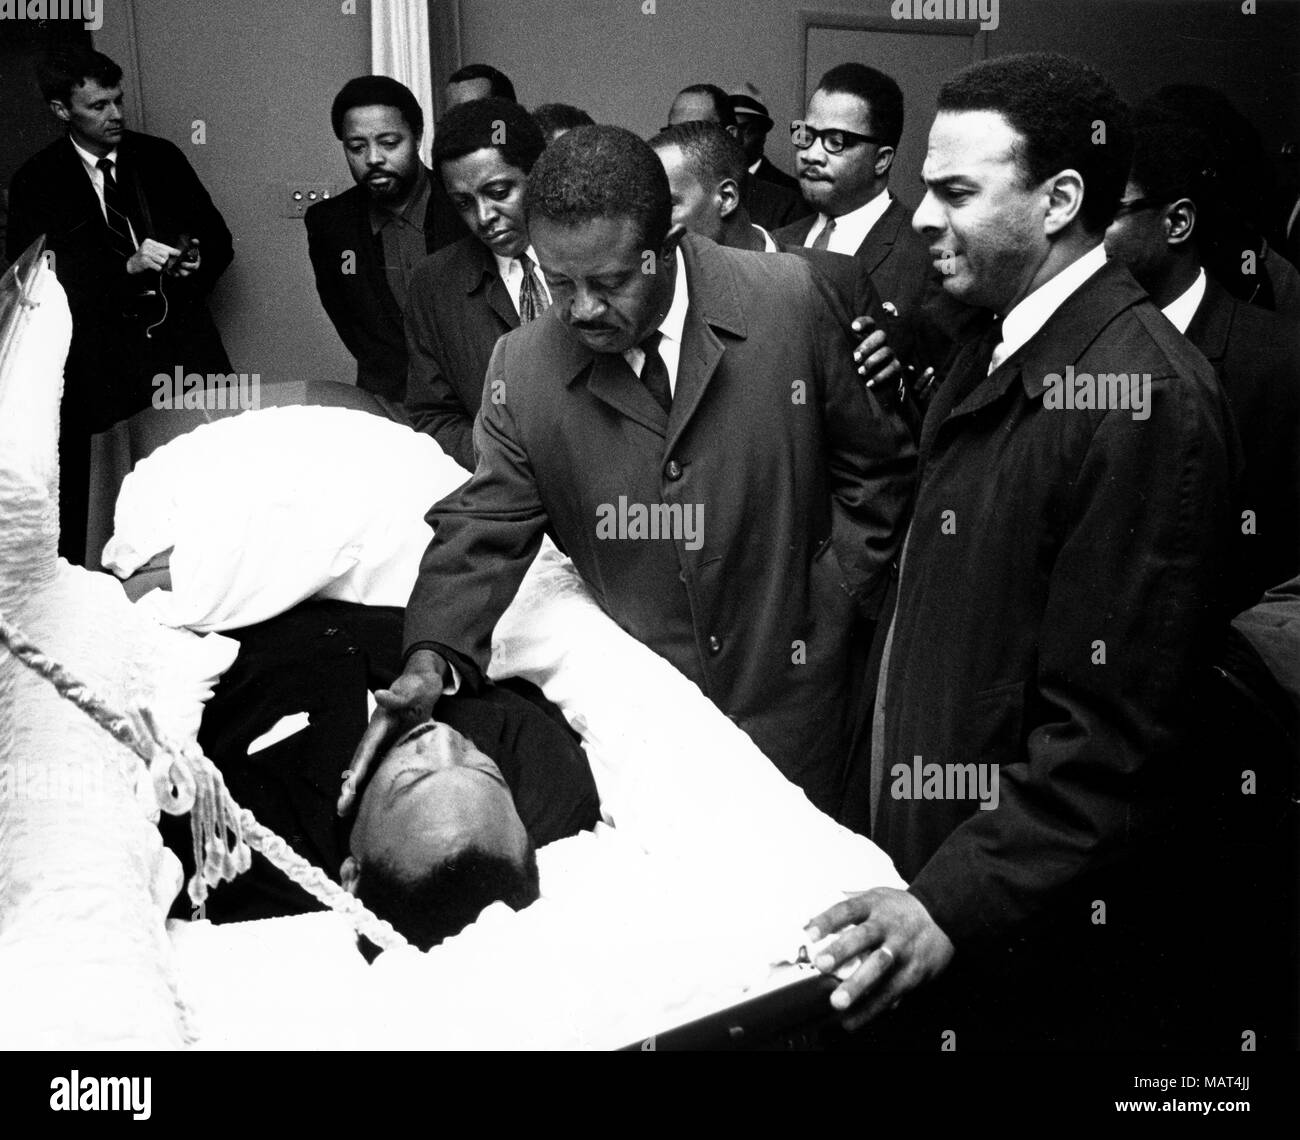 File. 4th Apr, 2018. Reverend MARTIN LUTHER KING JR. was fatally shot by J. Earl Ray at 6:01 p.m., April 4, 1968, as he stood on second-floor balcony of Lorraine Hotel in Memphis Tennessee. Pictured: April 9, 1968 - Atlanta, GA, U.S. - Martin Luther King, Jr.'s funeral in Atlanta. Pictured: Mourners gather around to say good bye at funeral.(Credit Image: © Keystone Press Agency/Keystone USA via ZUMAPRESS.com) Stock Photo